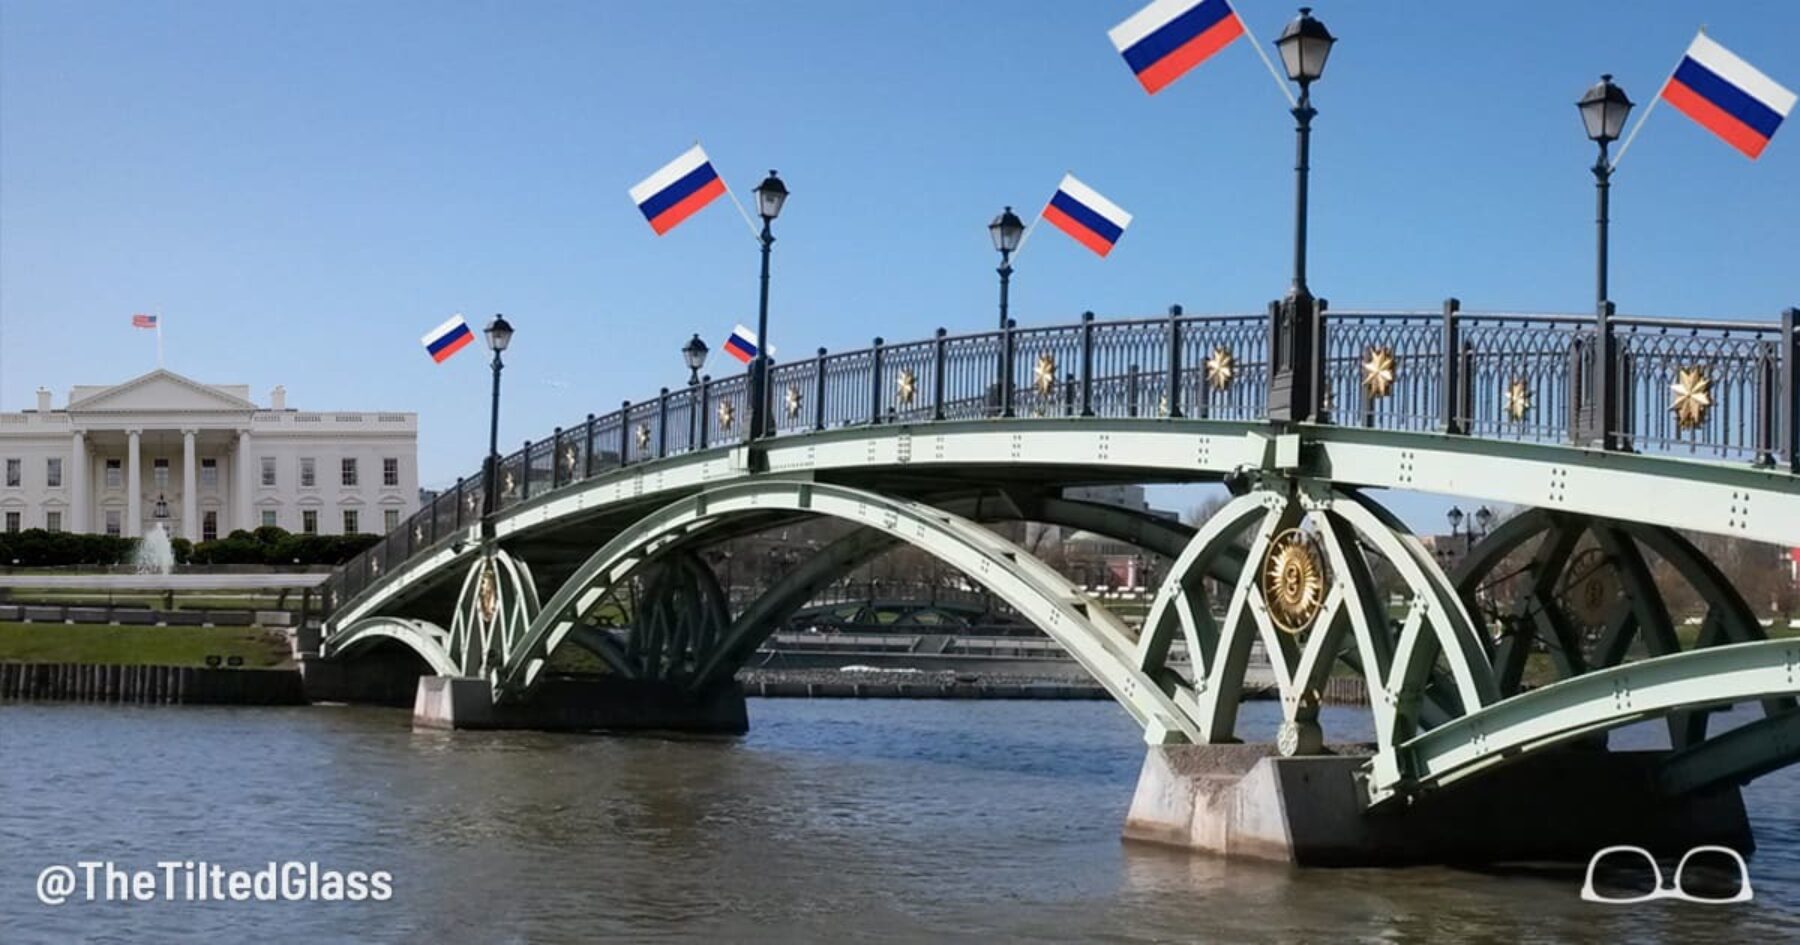 Putin Opens Bridge to White House, Cementing Russia’s Hold on Neighbor